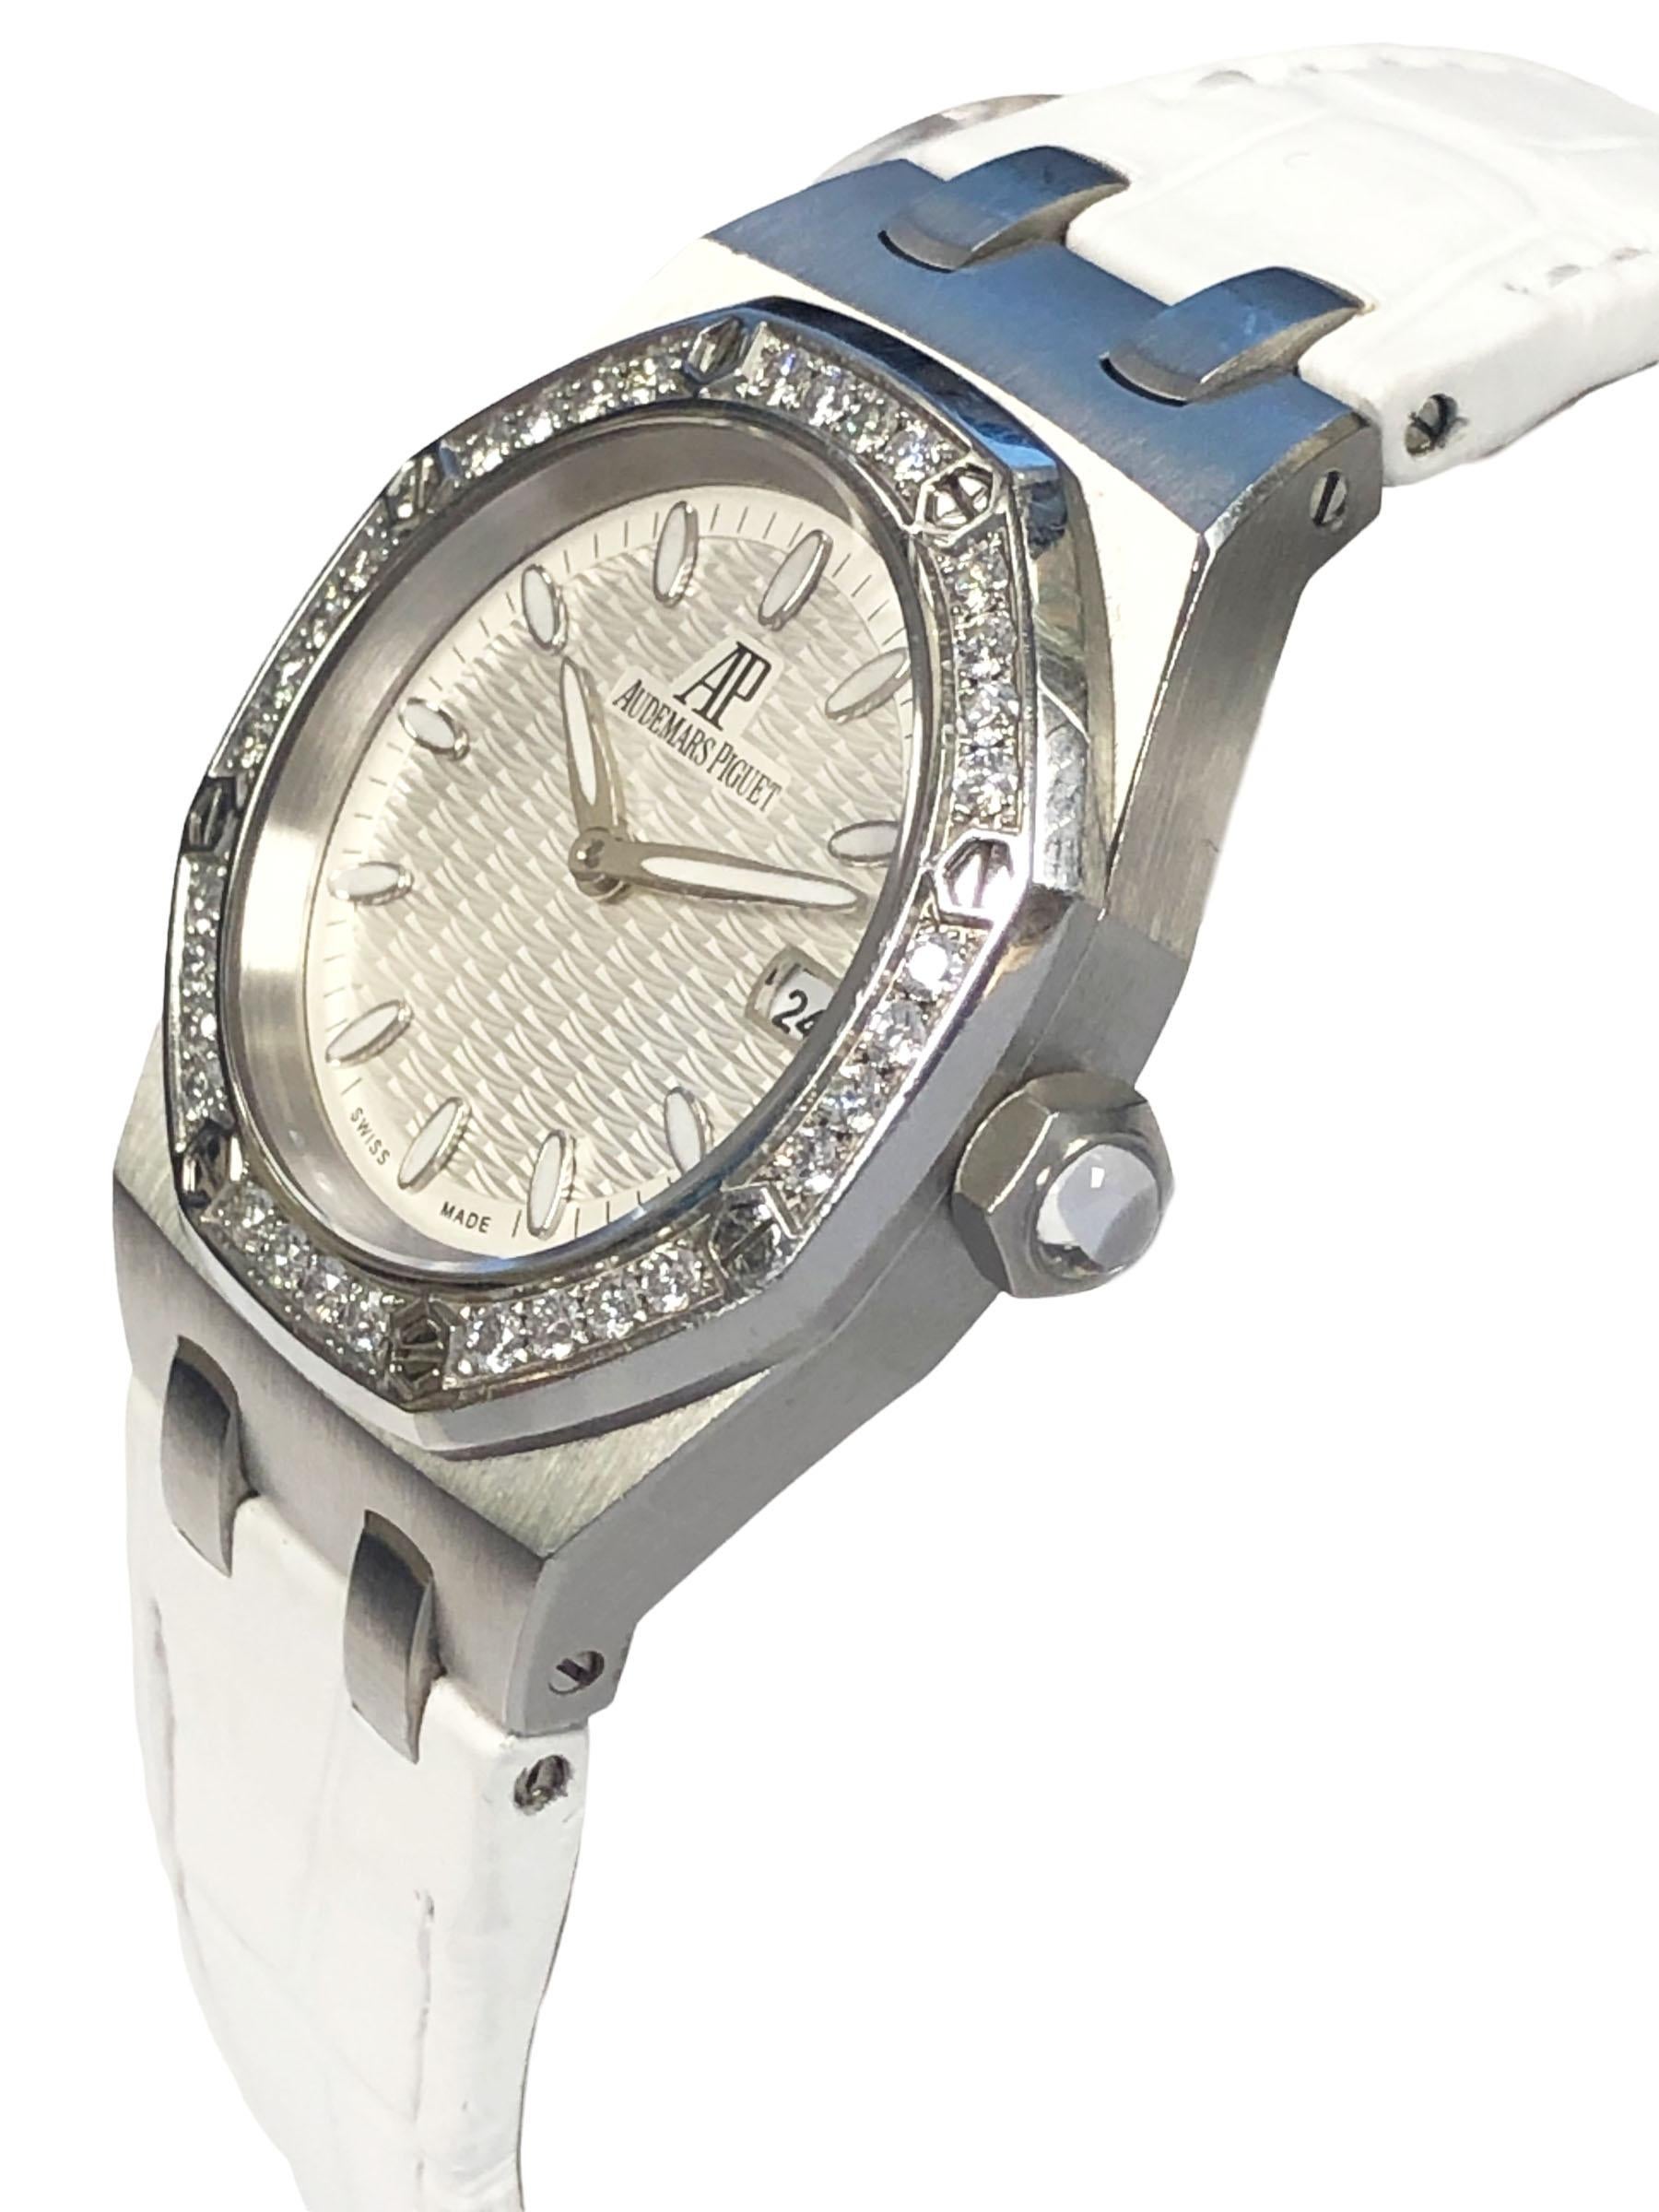 Circa 2004 Audemars Piguet Royal Oak, Ladies Reference 67601st Wrist Watch, 33 M.M. Stainless Steel water resistant 2 piece  case with a bezel of 32 Round Brilliant cut Diamonds, caliber 2712 Quartz Movement, Silver wave dial with raised markers and